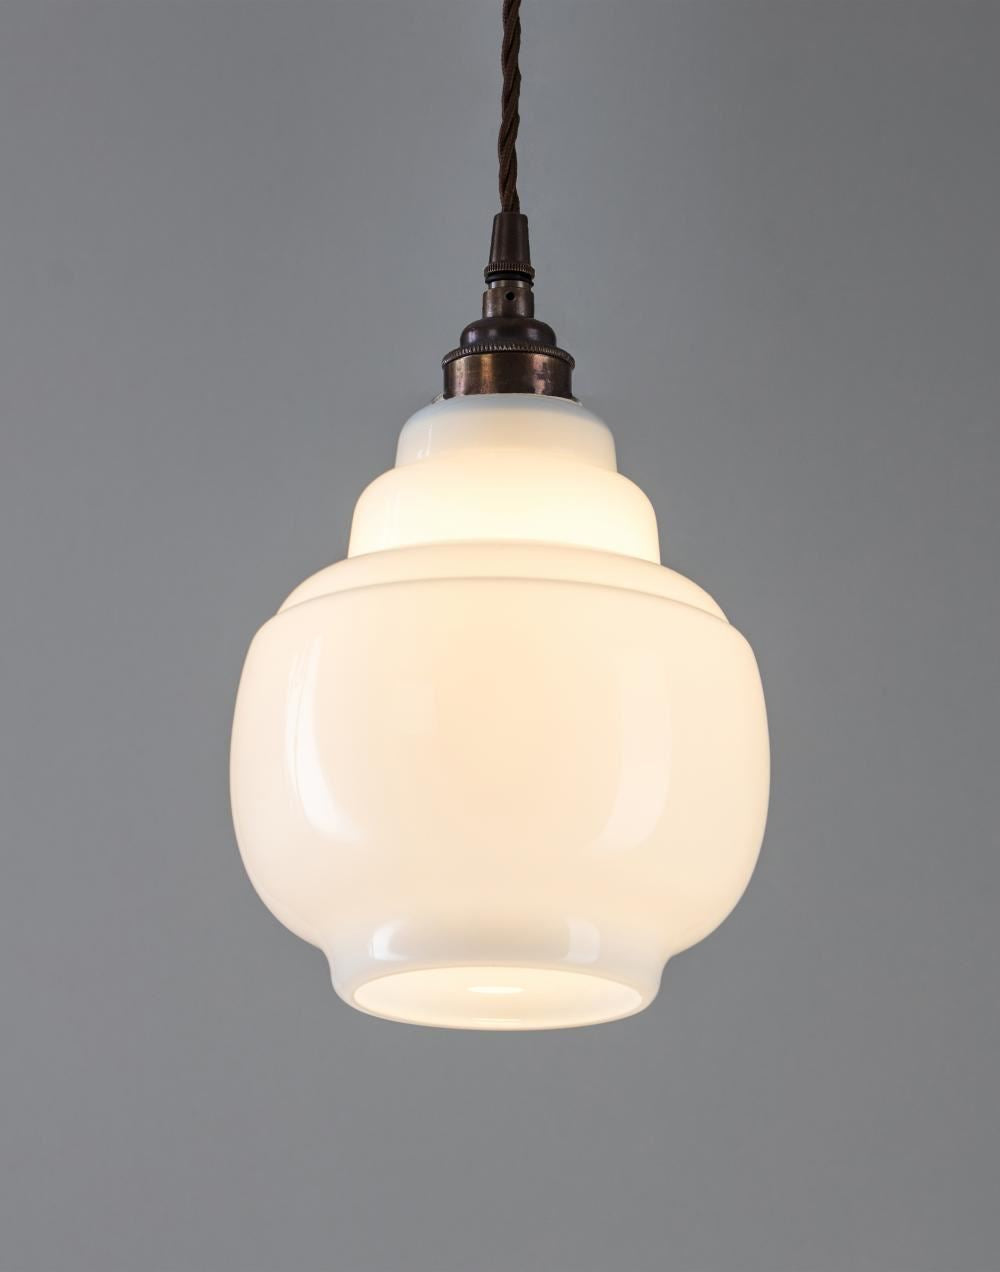 An Old School Electric Barrel Opal Glass Pendant Light fitting with a white shade and a brown cord.